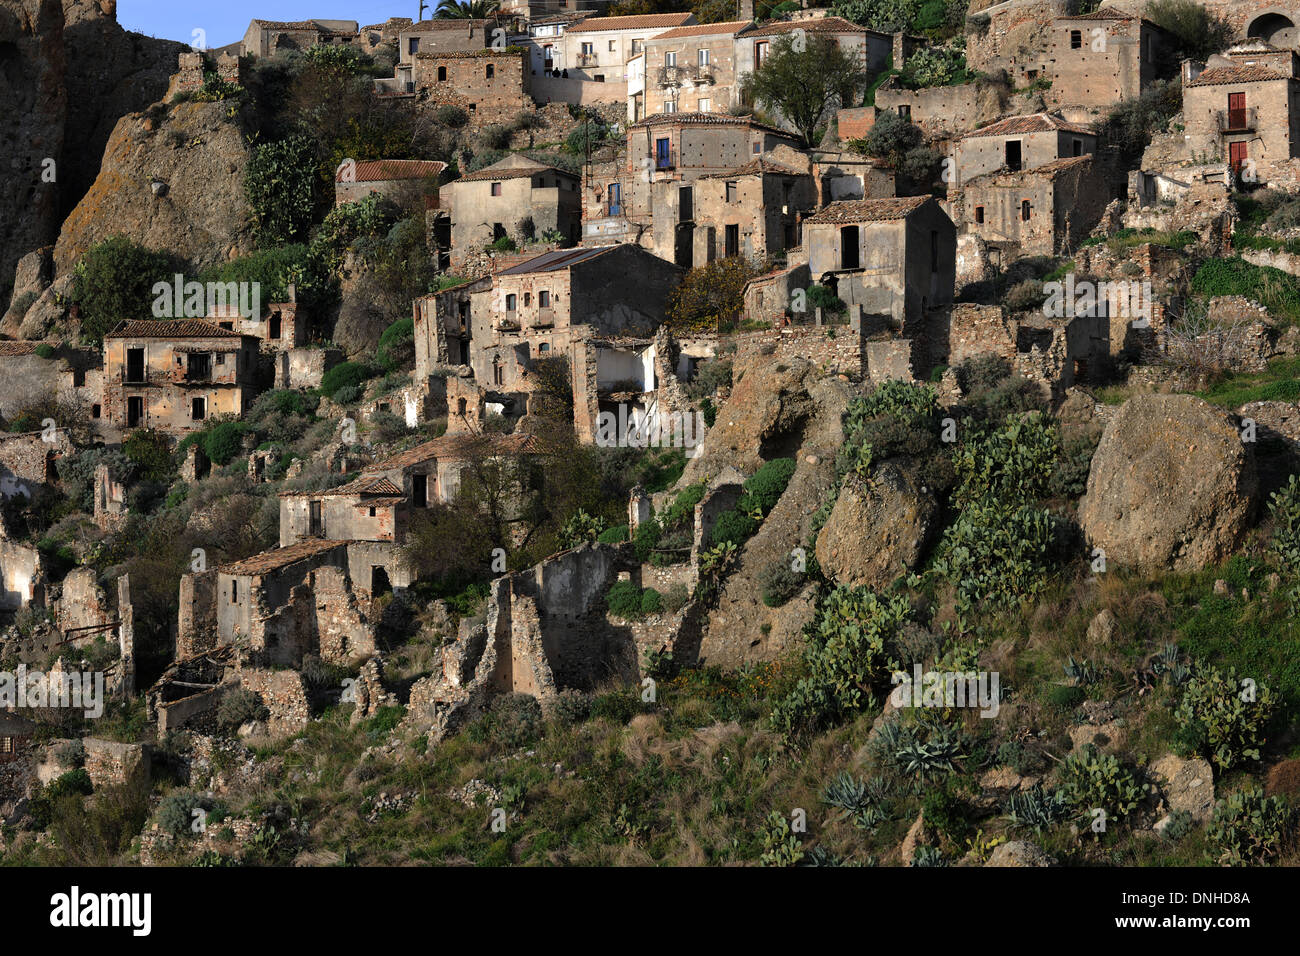 Abandoned village in rural southern Italy,Pentidattilo Calabria. Stock Photo